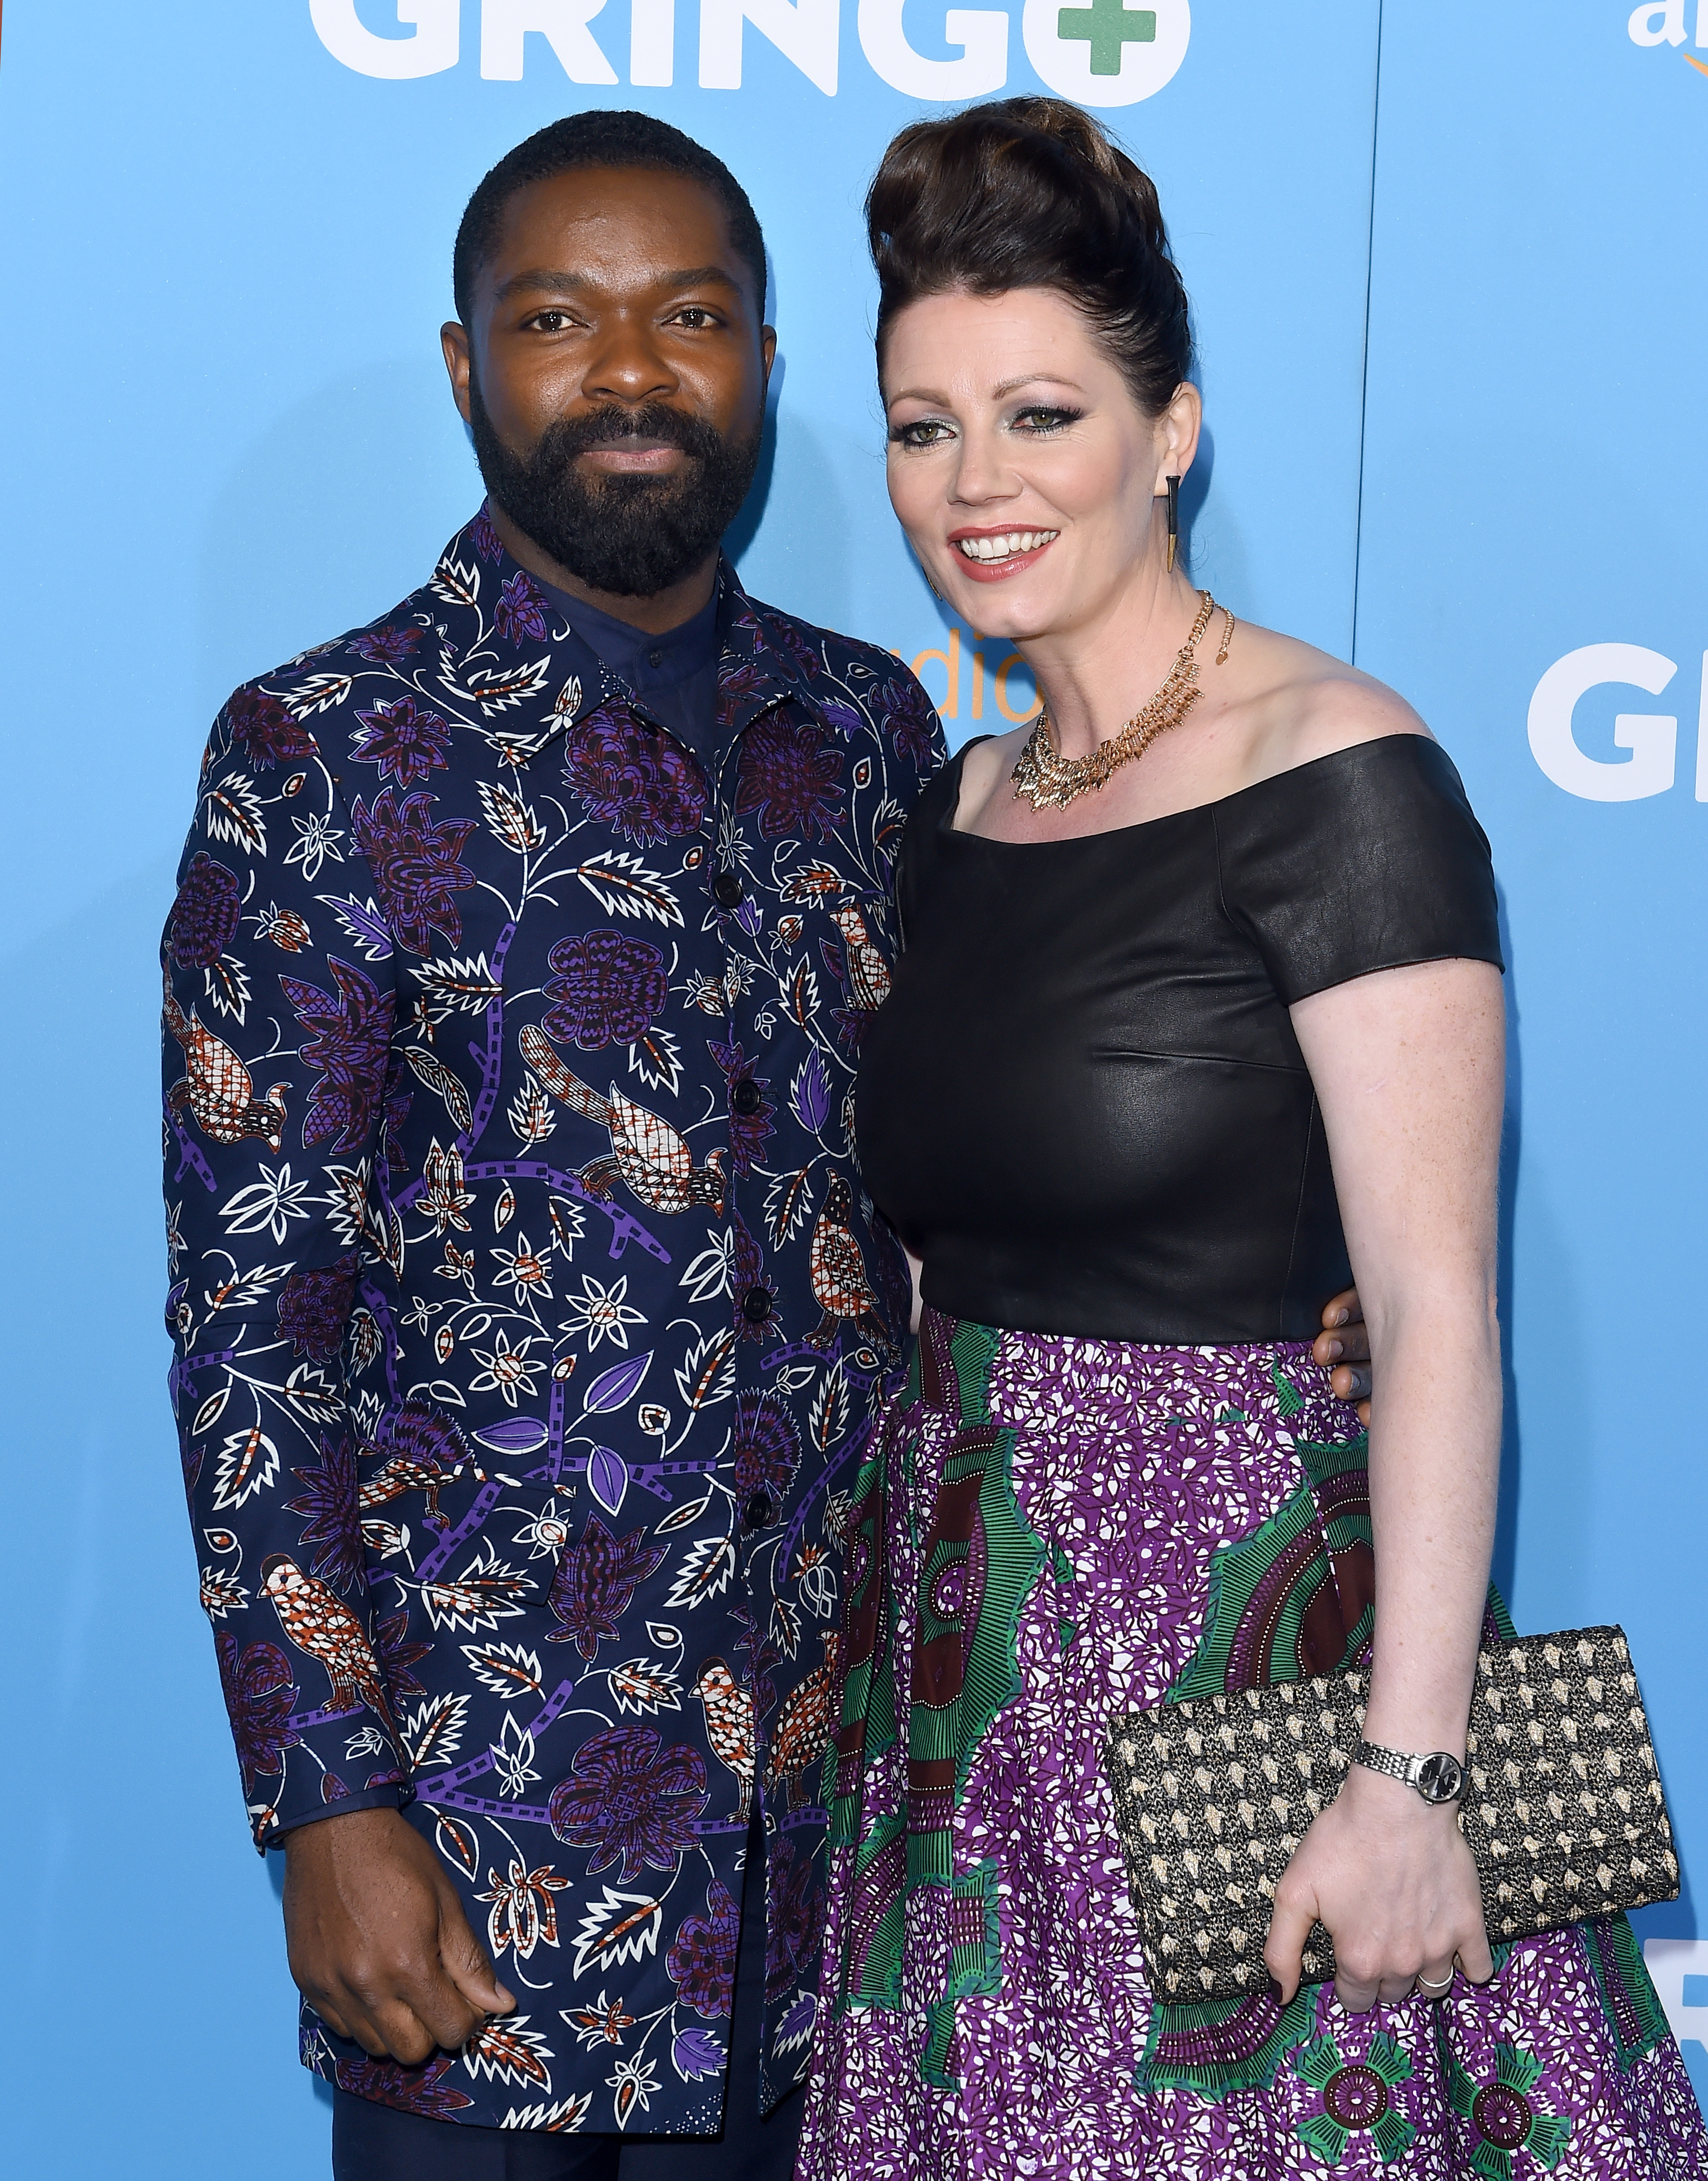 Jessica and David Oyelowo at the World Premiere of "Gringo" on March 6, 2018, in Los Angeles, California. | Source: Getty Images